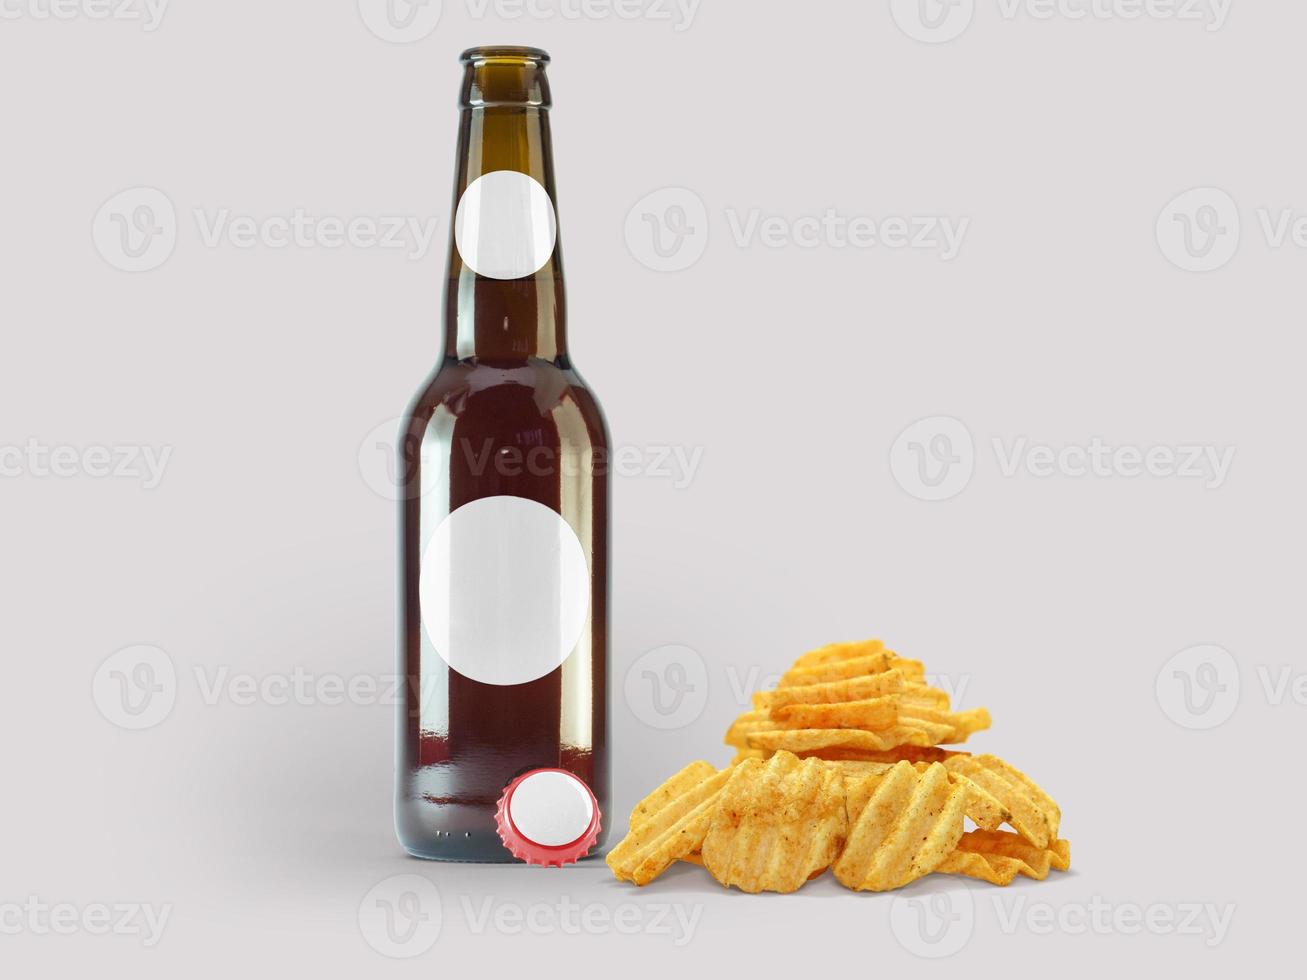 Potatoes chip snacks and brown bottle isolated on colored background. oktoberfest concept. photo